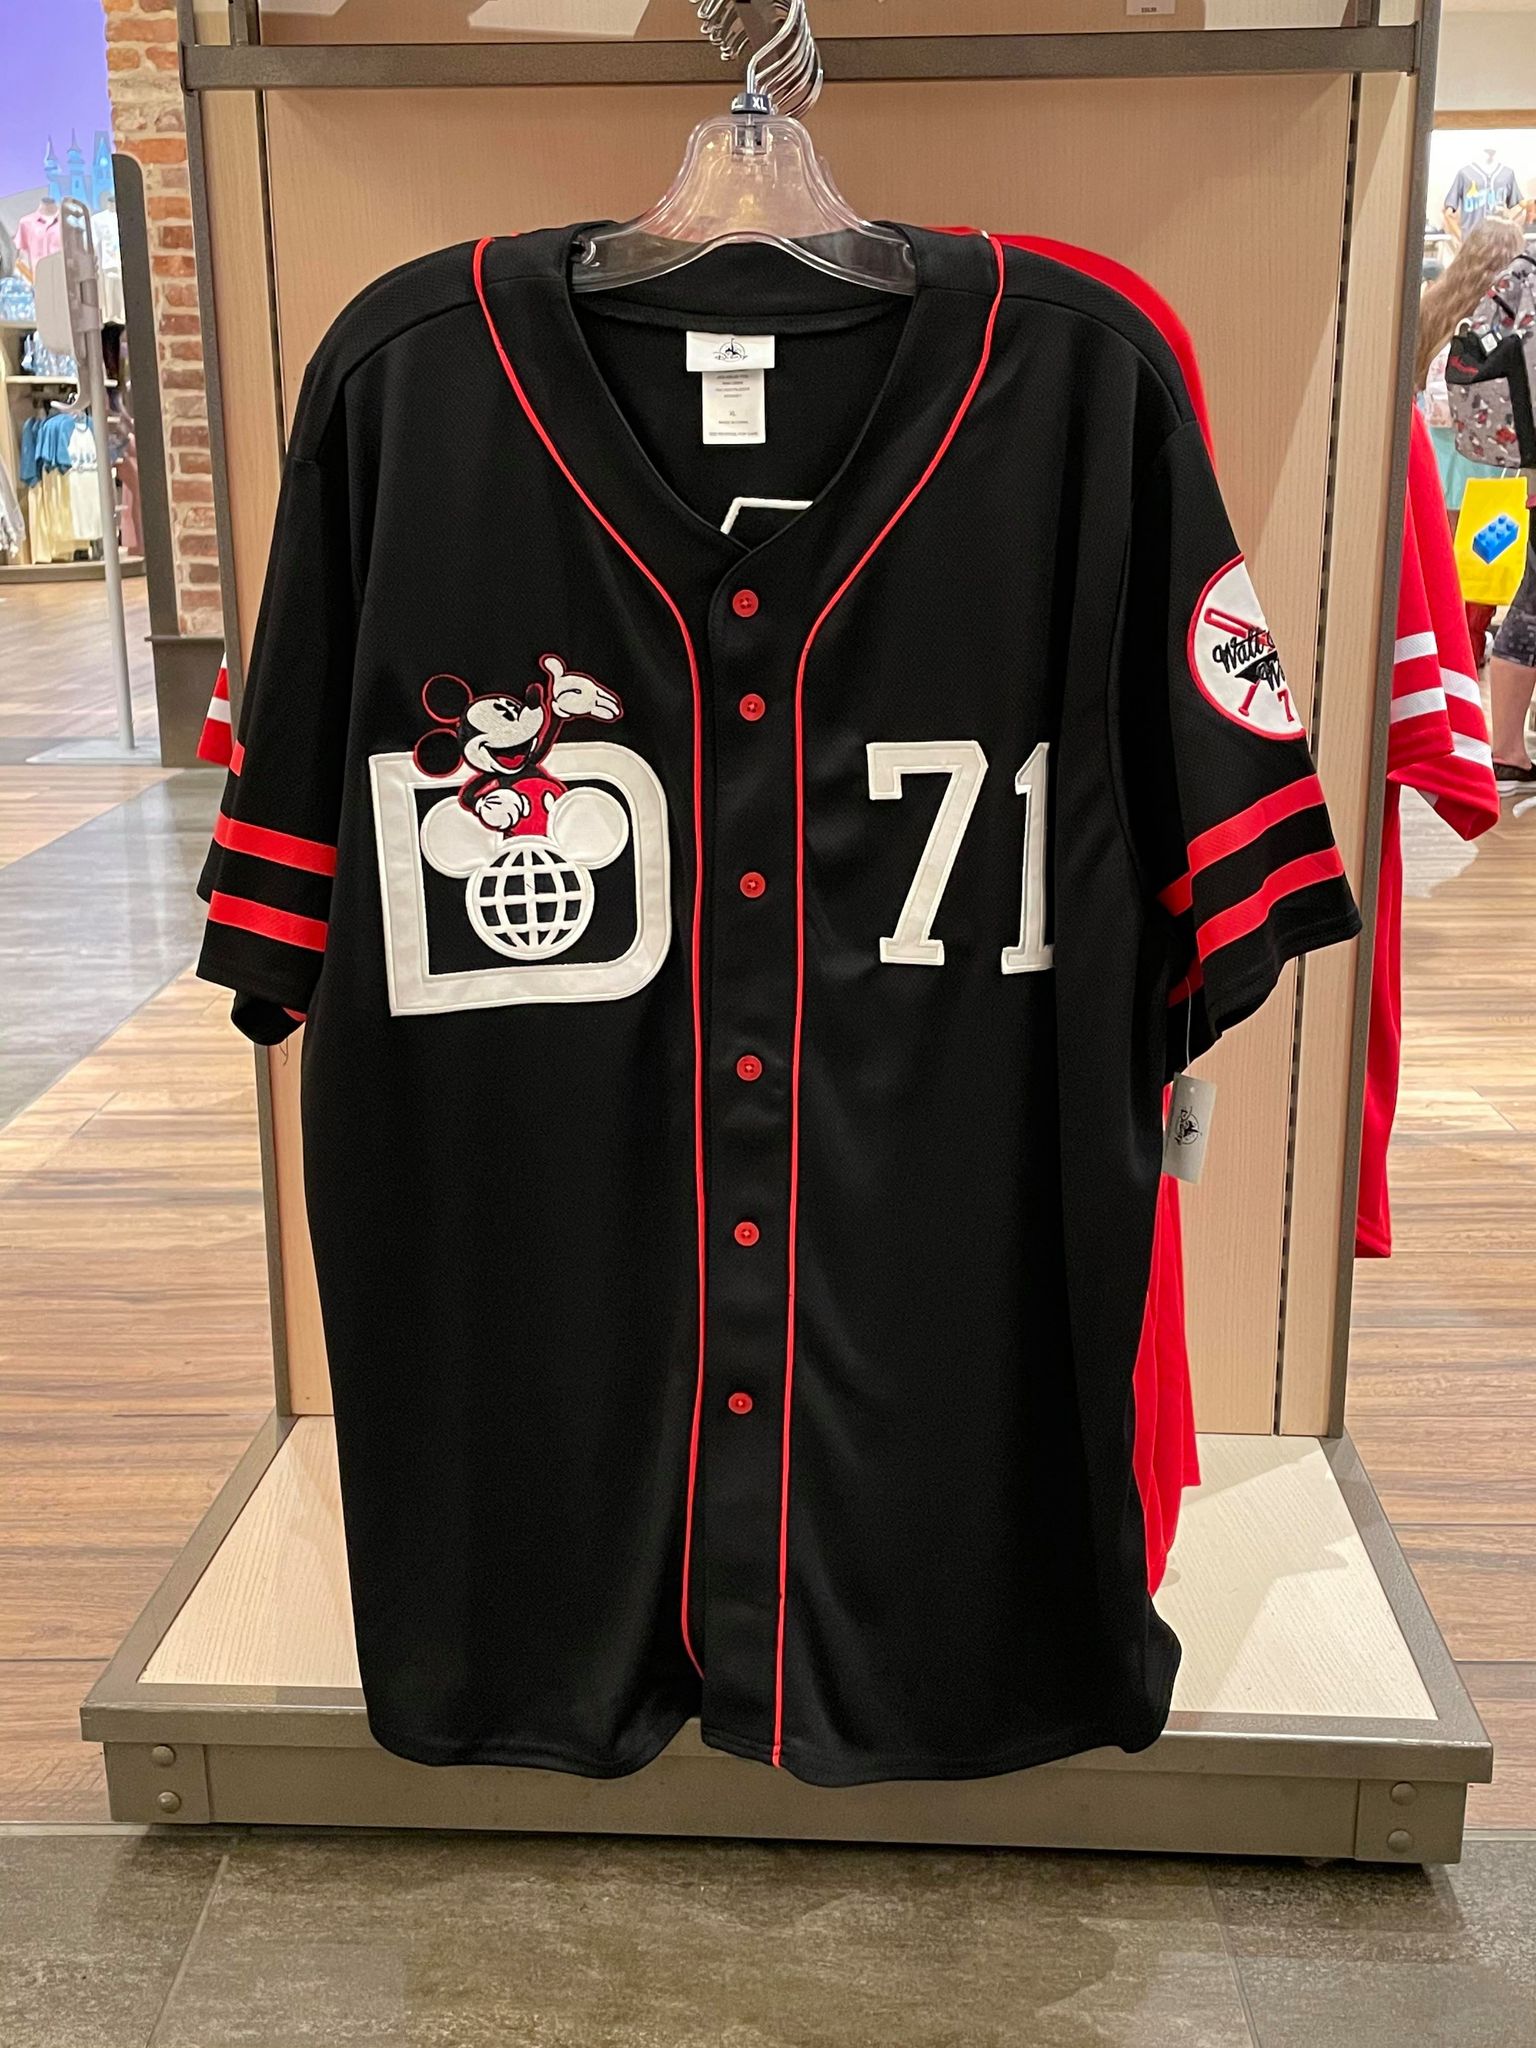 These Disney Baseball Jerseys Will Add Some Athletic Style To Your ...